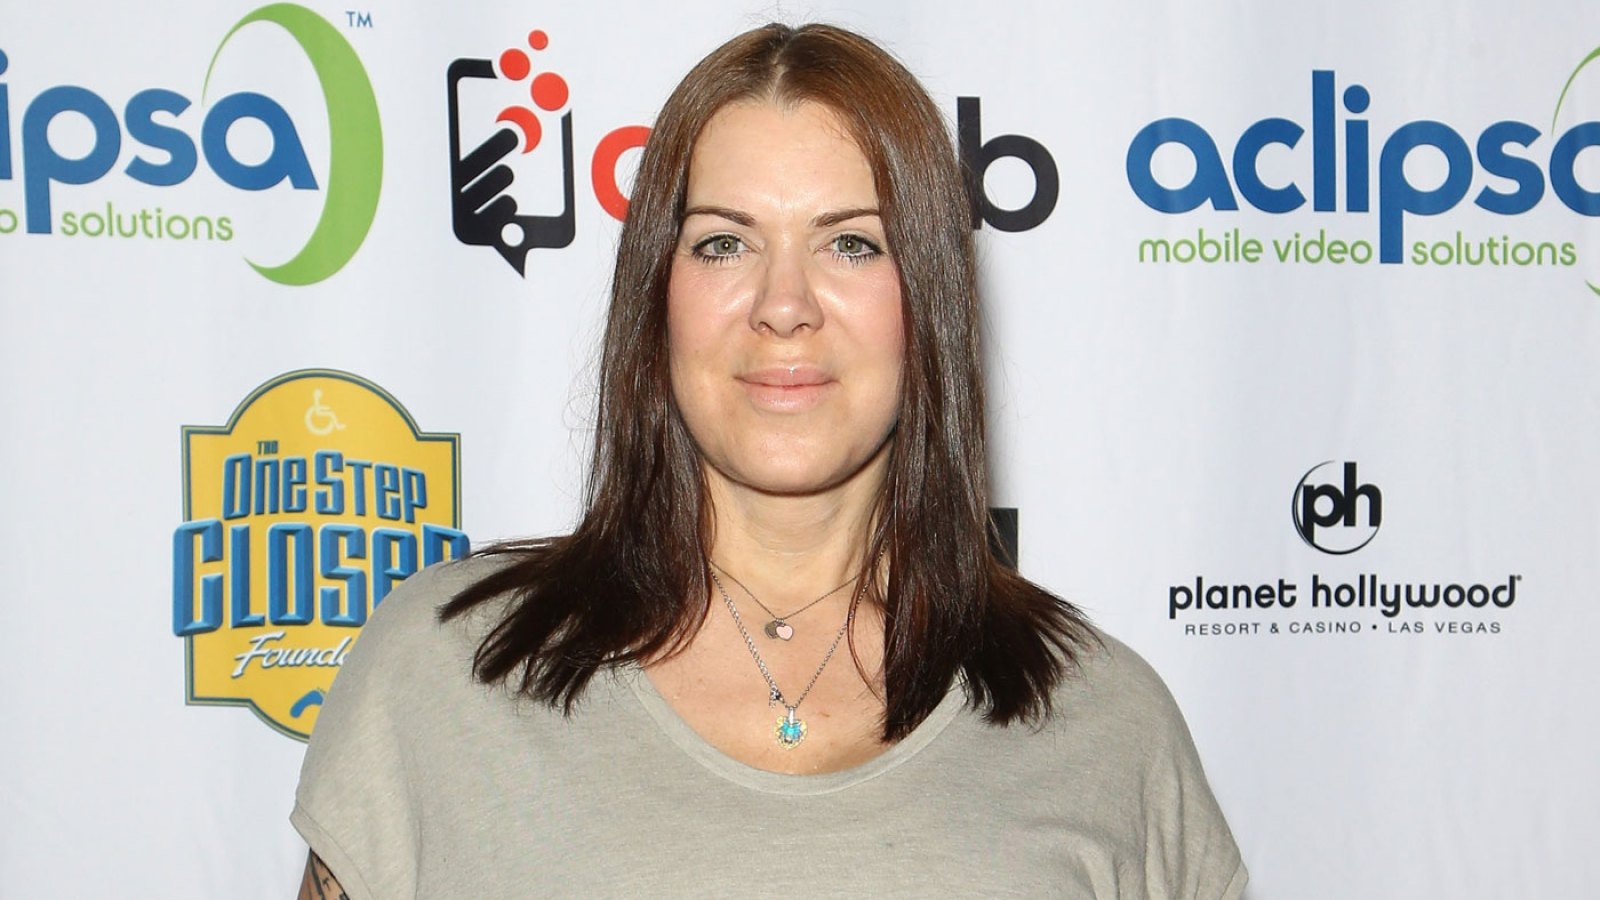 Chyna likely overdosed on Ambien and Valium